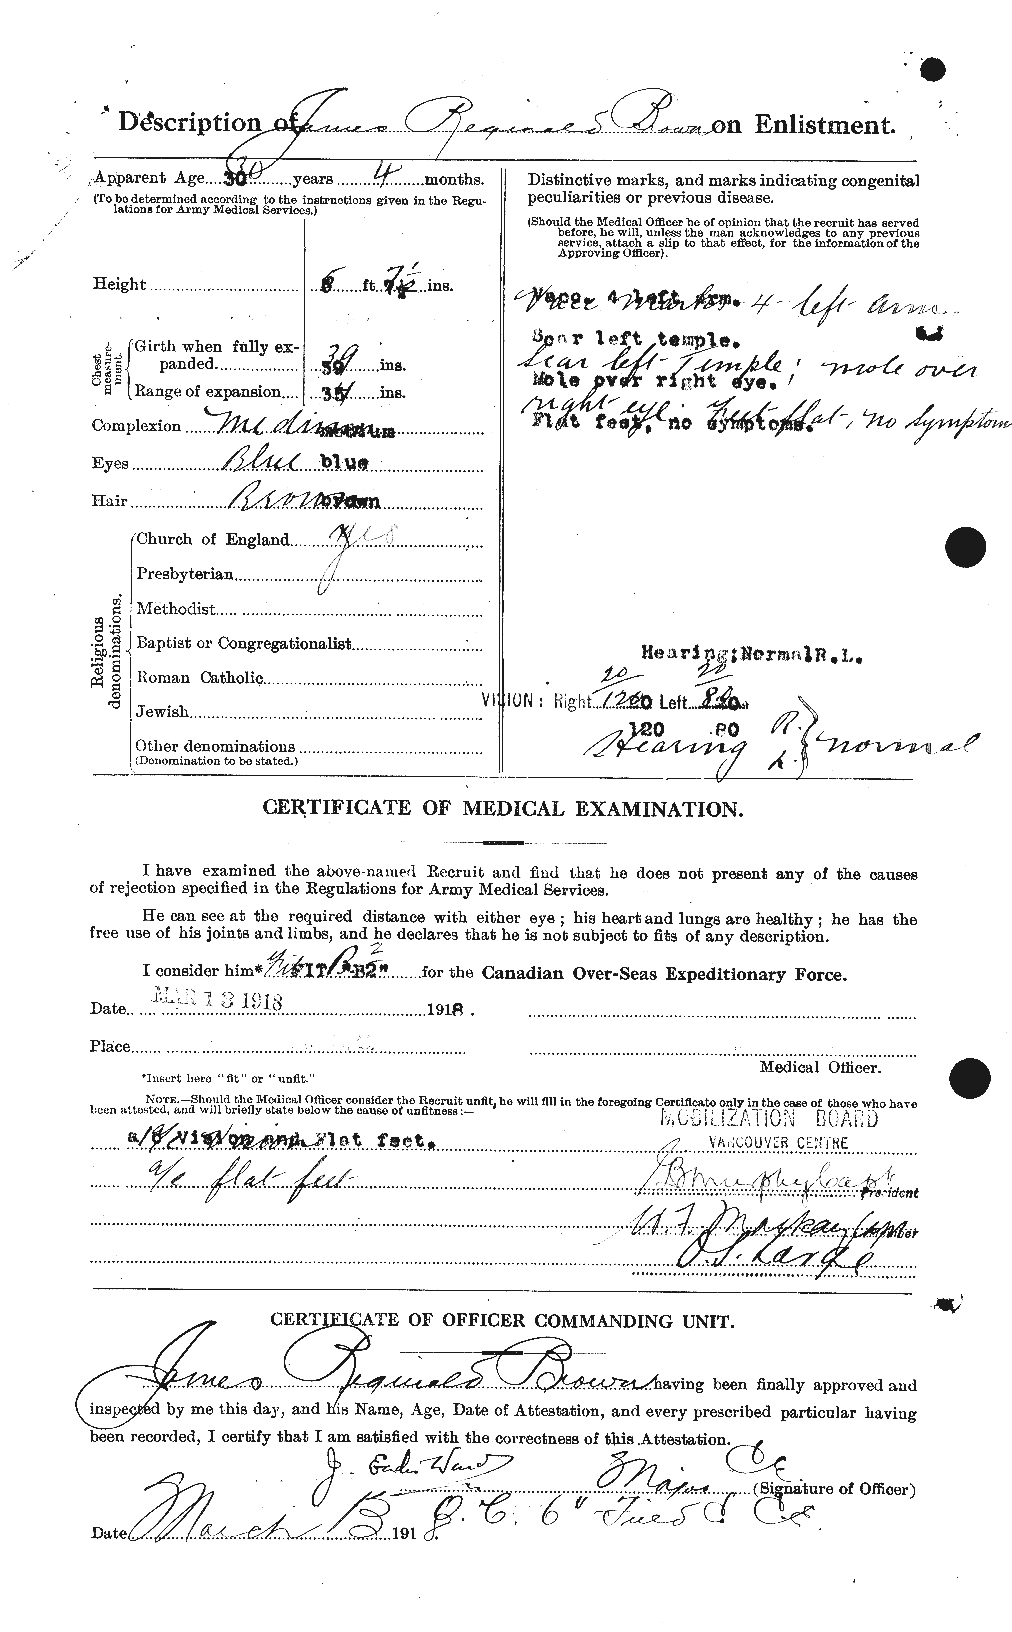 Personnel Records of the First World War - CEF 269577b